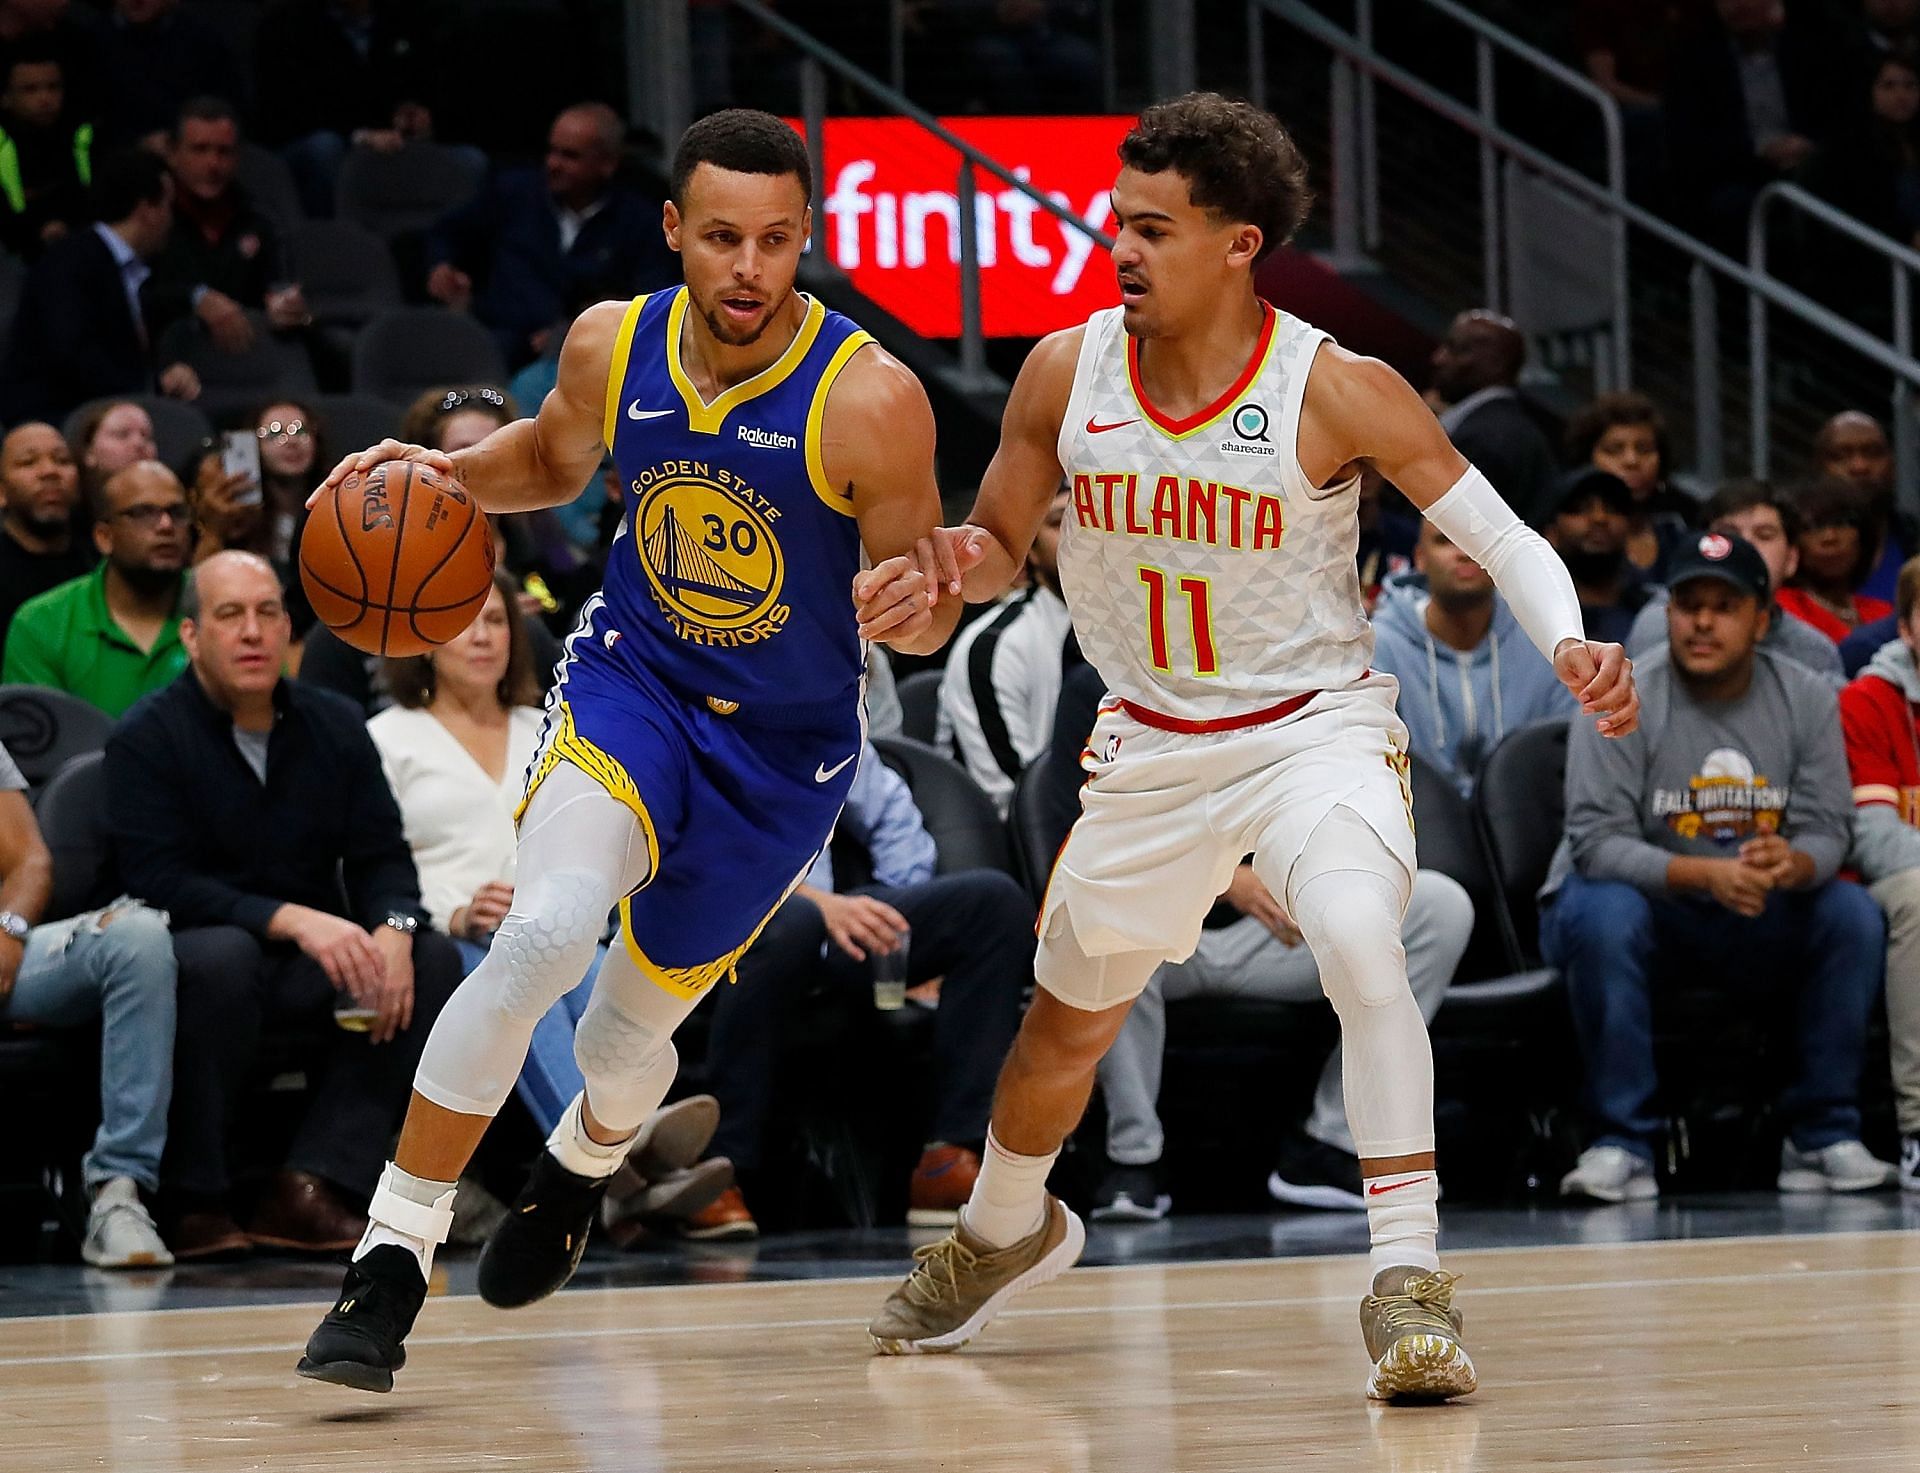 Steph Curry drives past Trae Young.